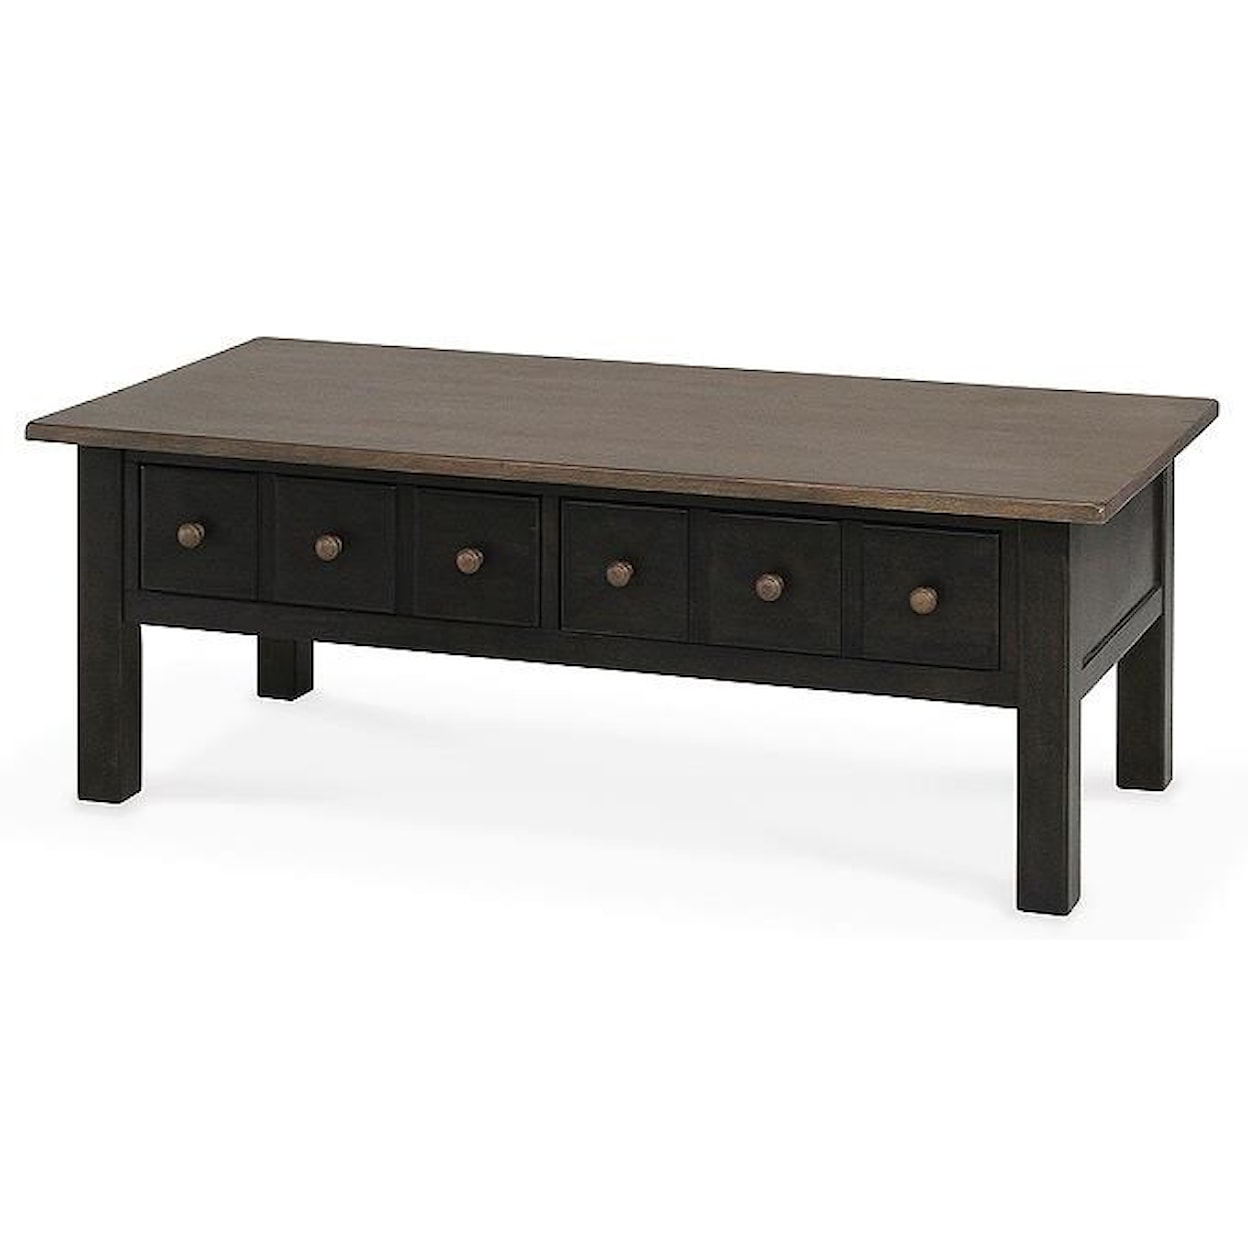 Peters Revington Crossnore Cocktail Table